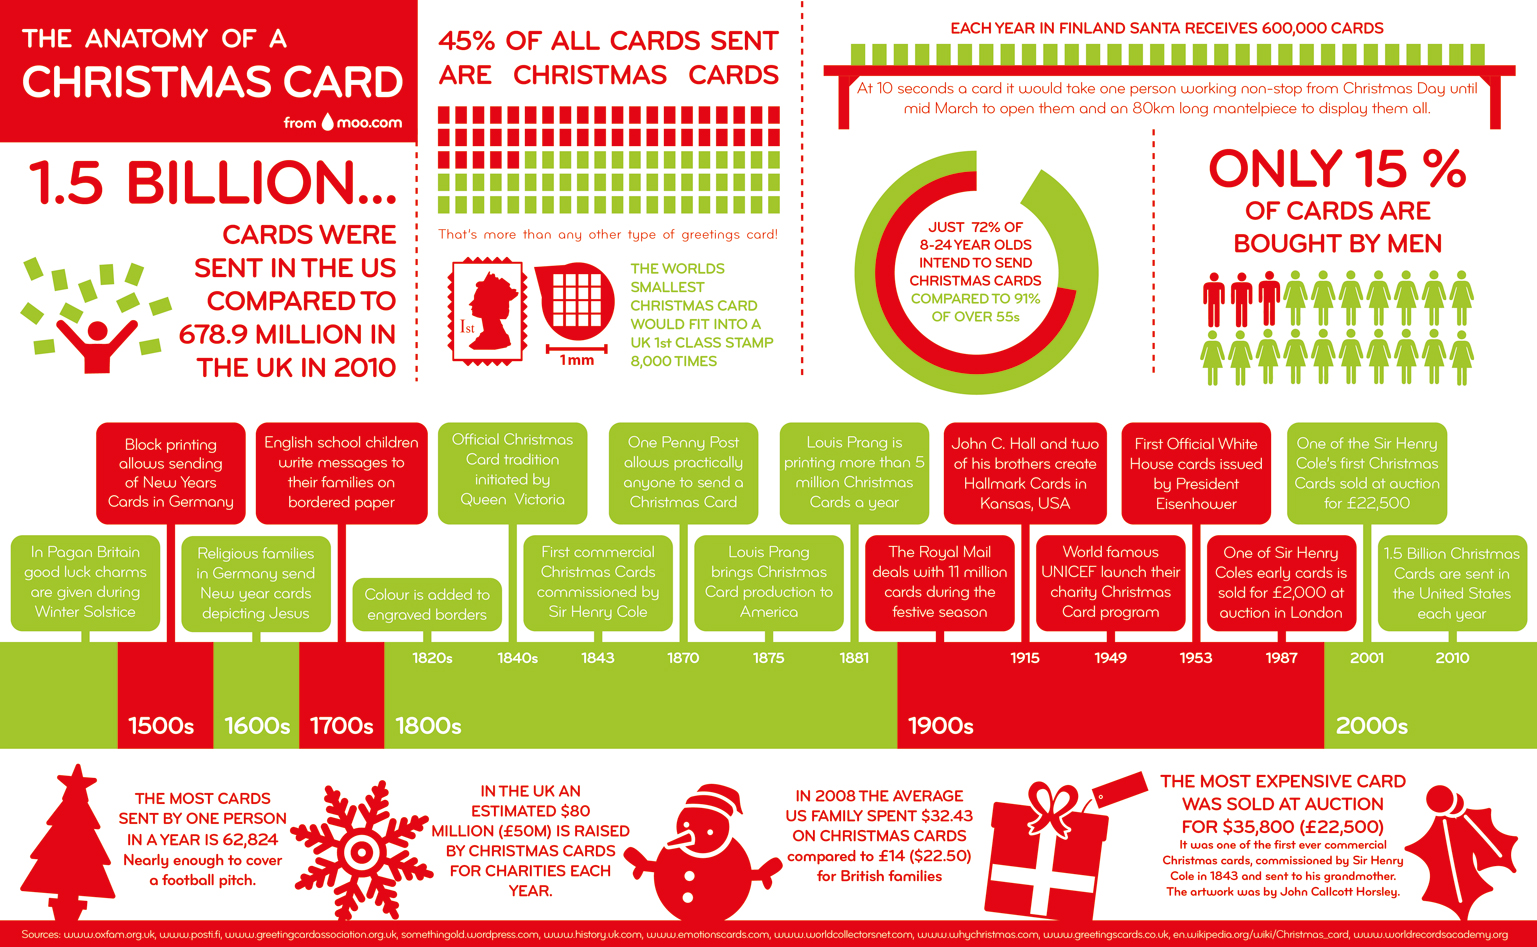 Christmas Cards Tradition (infographic)